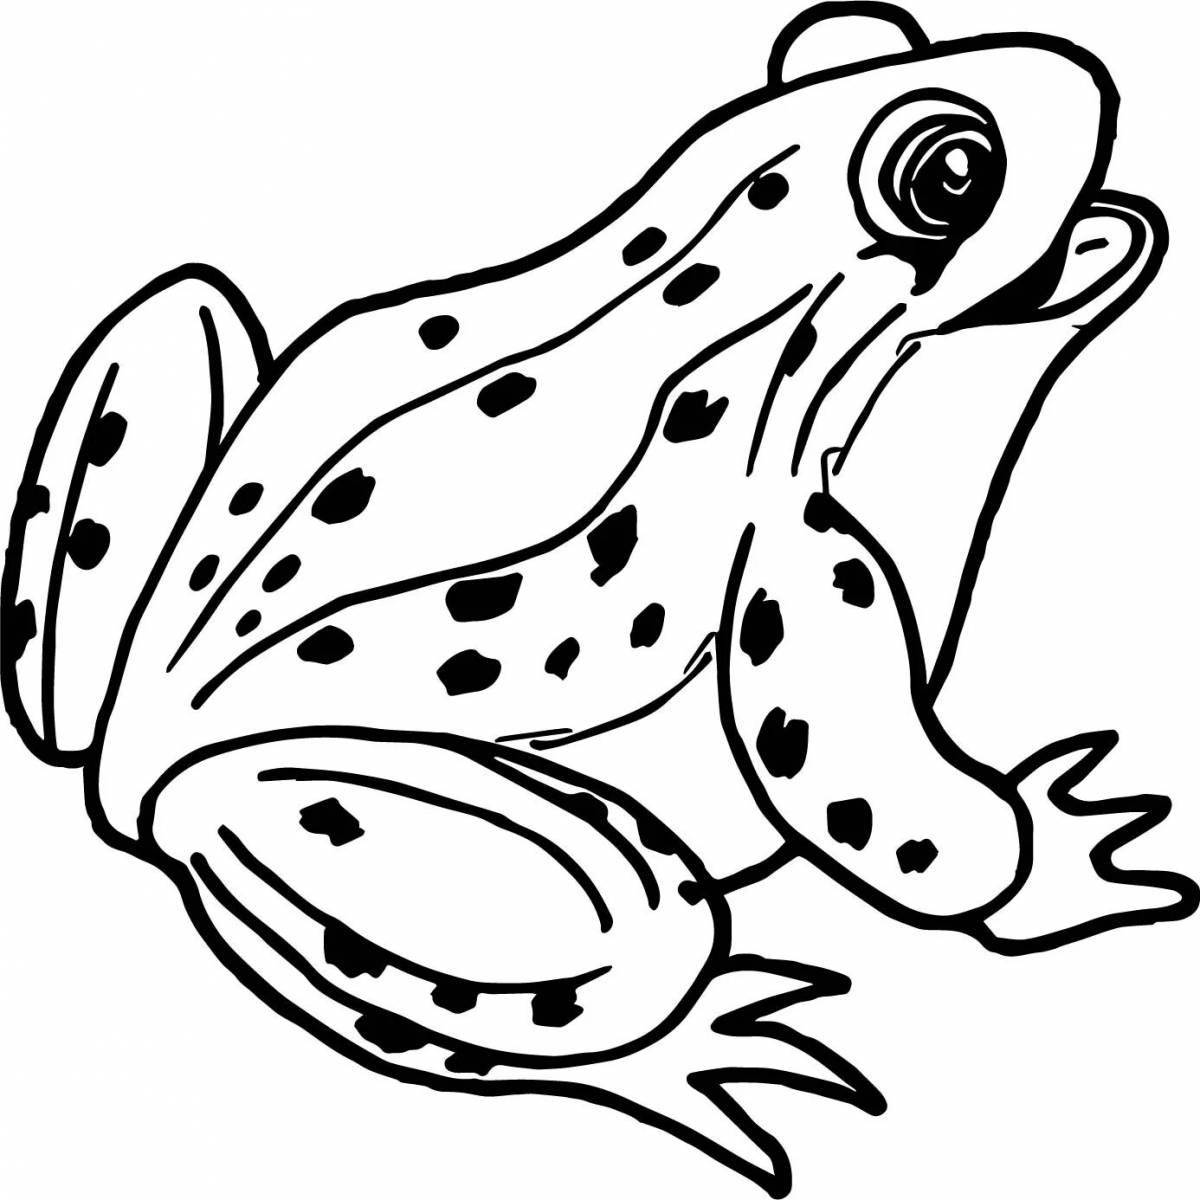 Fancy coloring pages of frogs